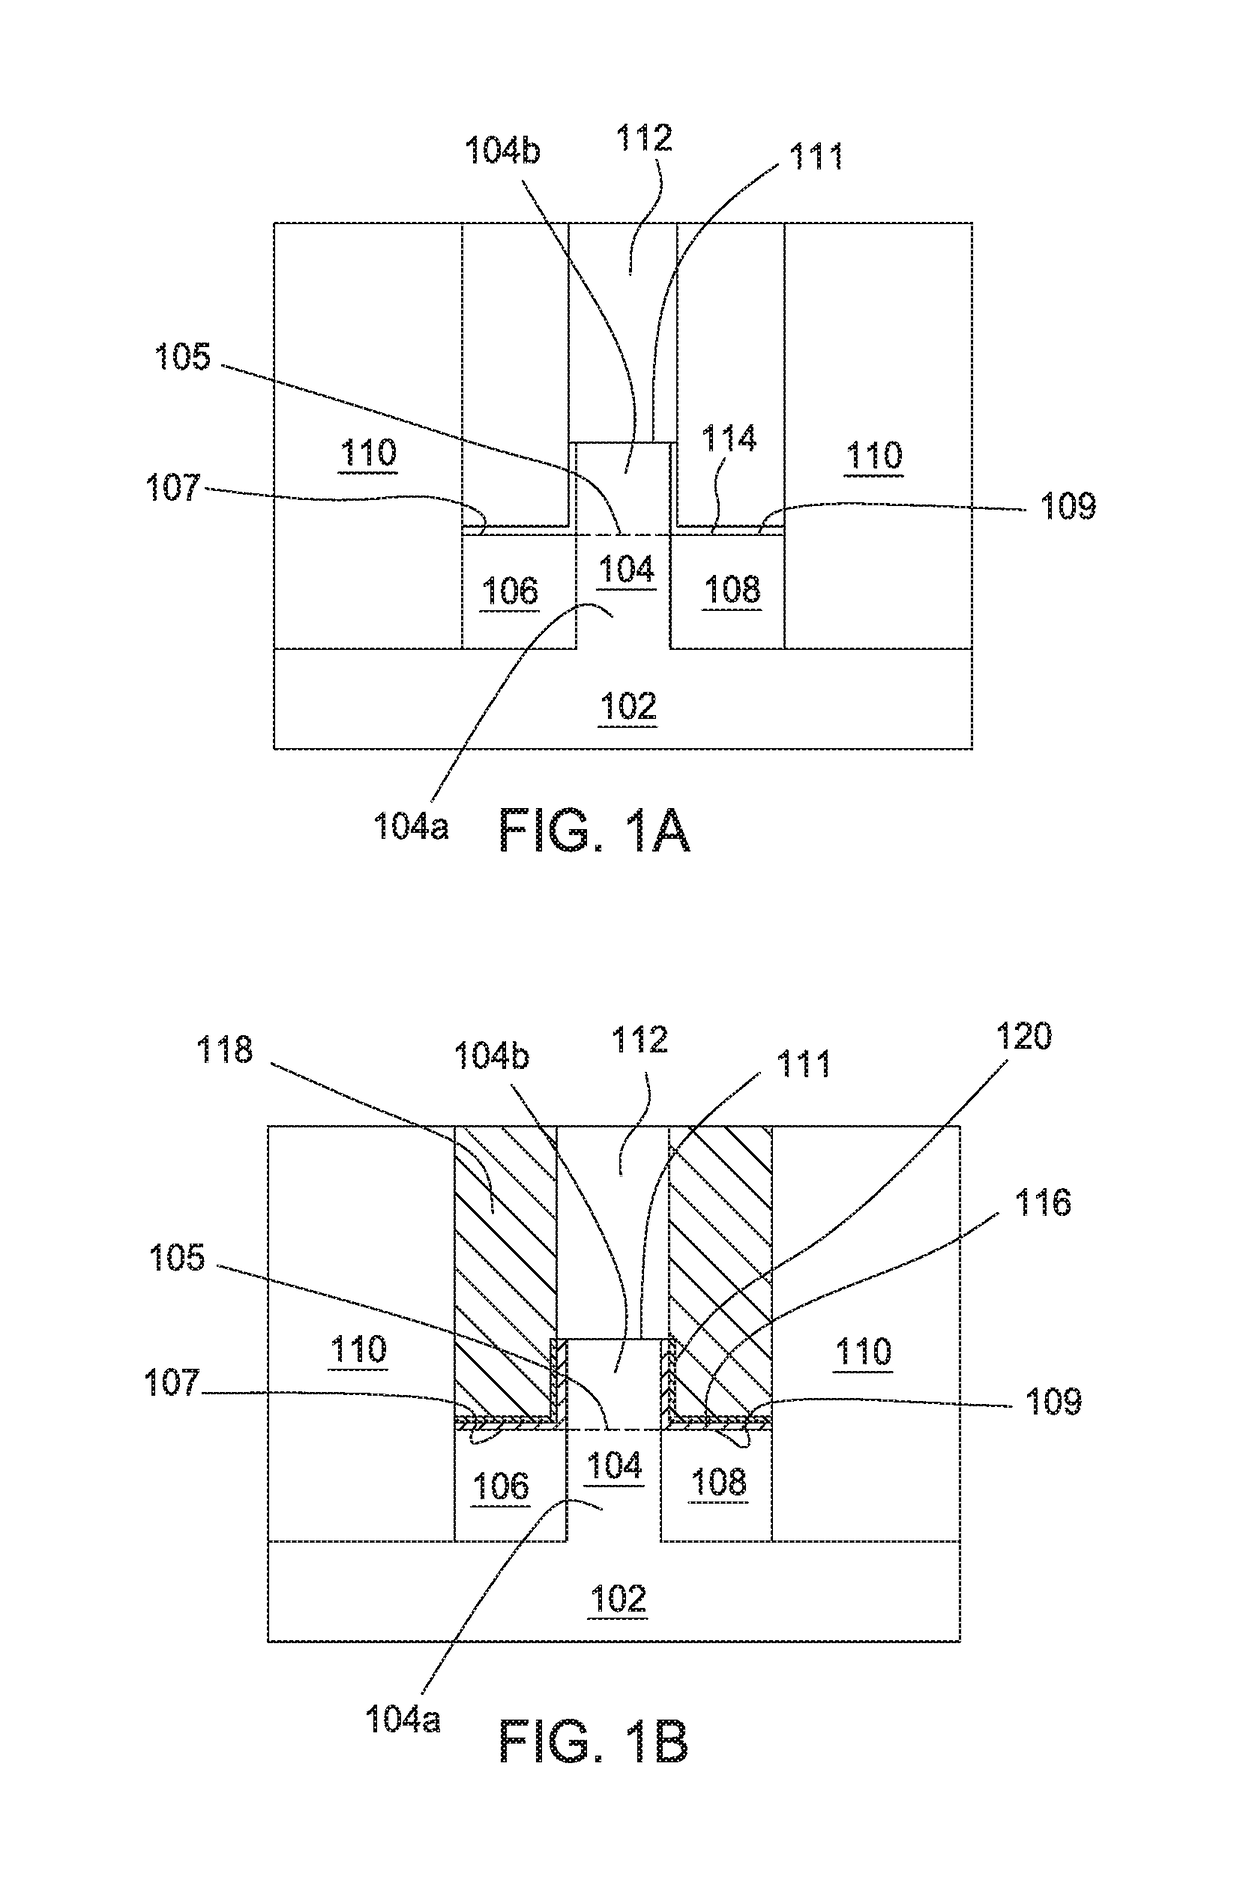 Integrated method for wafer outgassing reduction